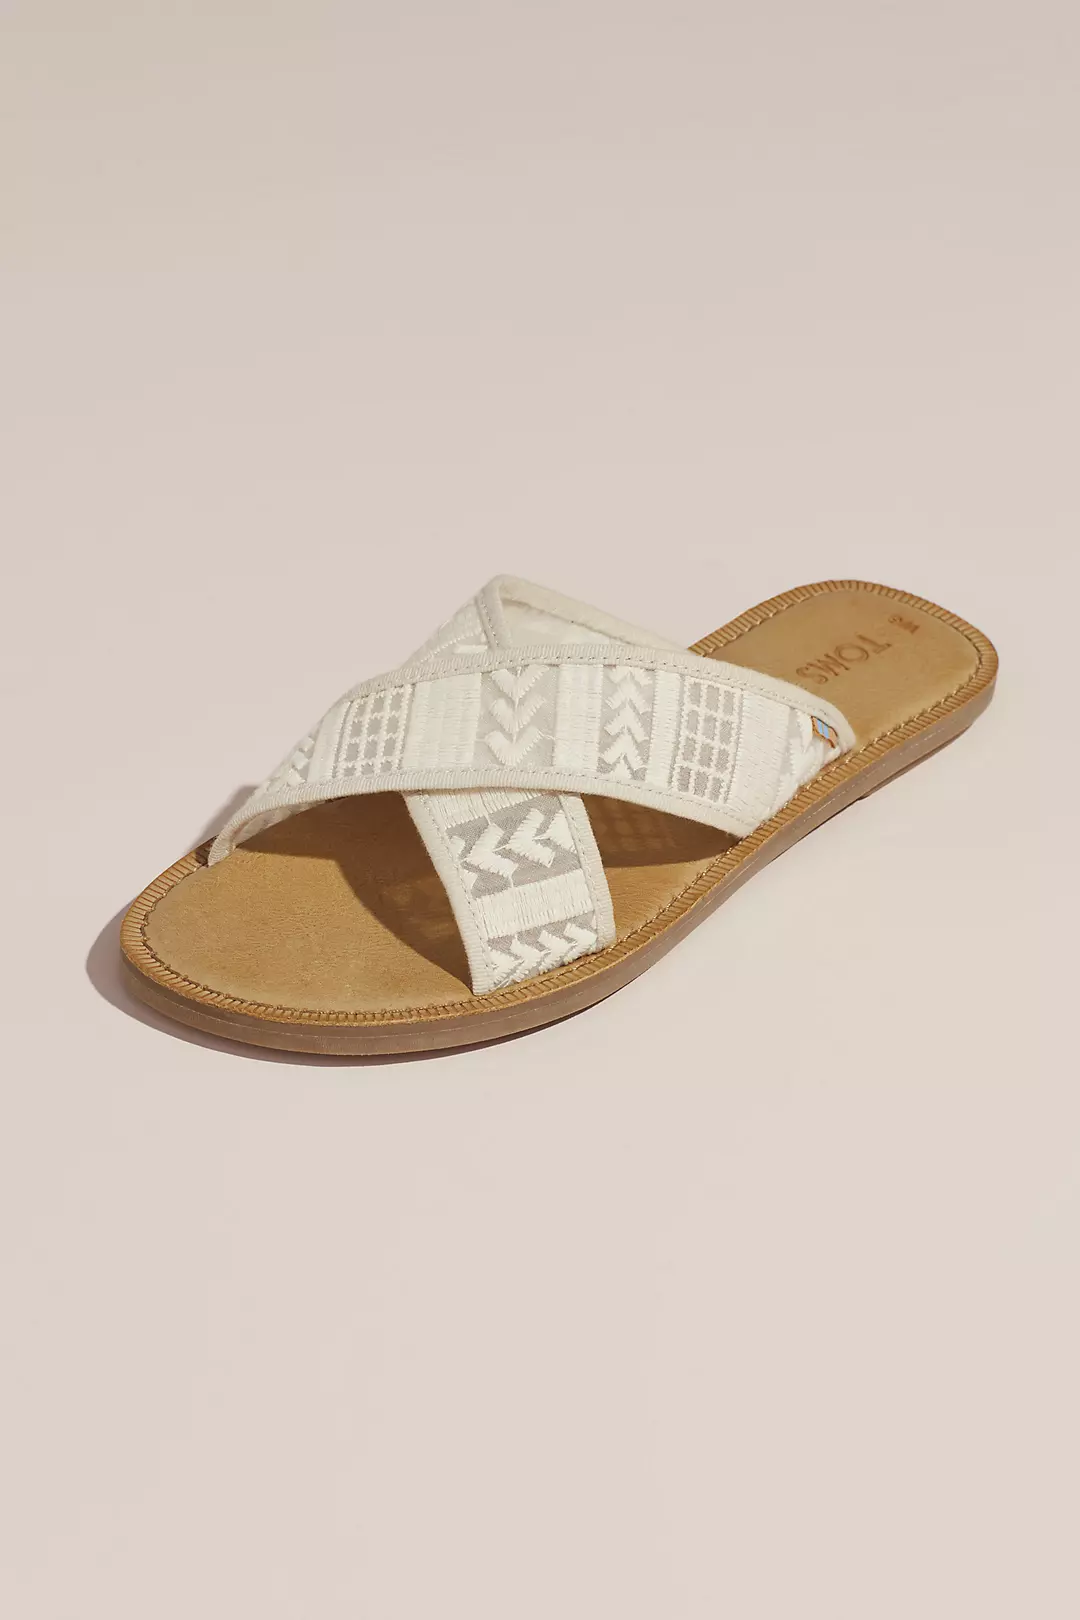 TOMS Embroidered Arrow Crisscross Slip-On Sandals Image